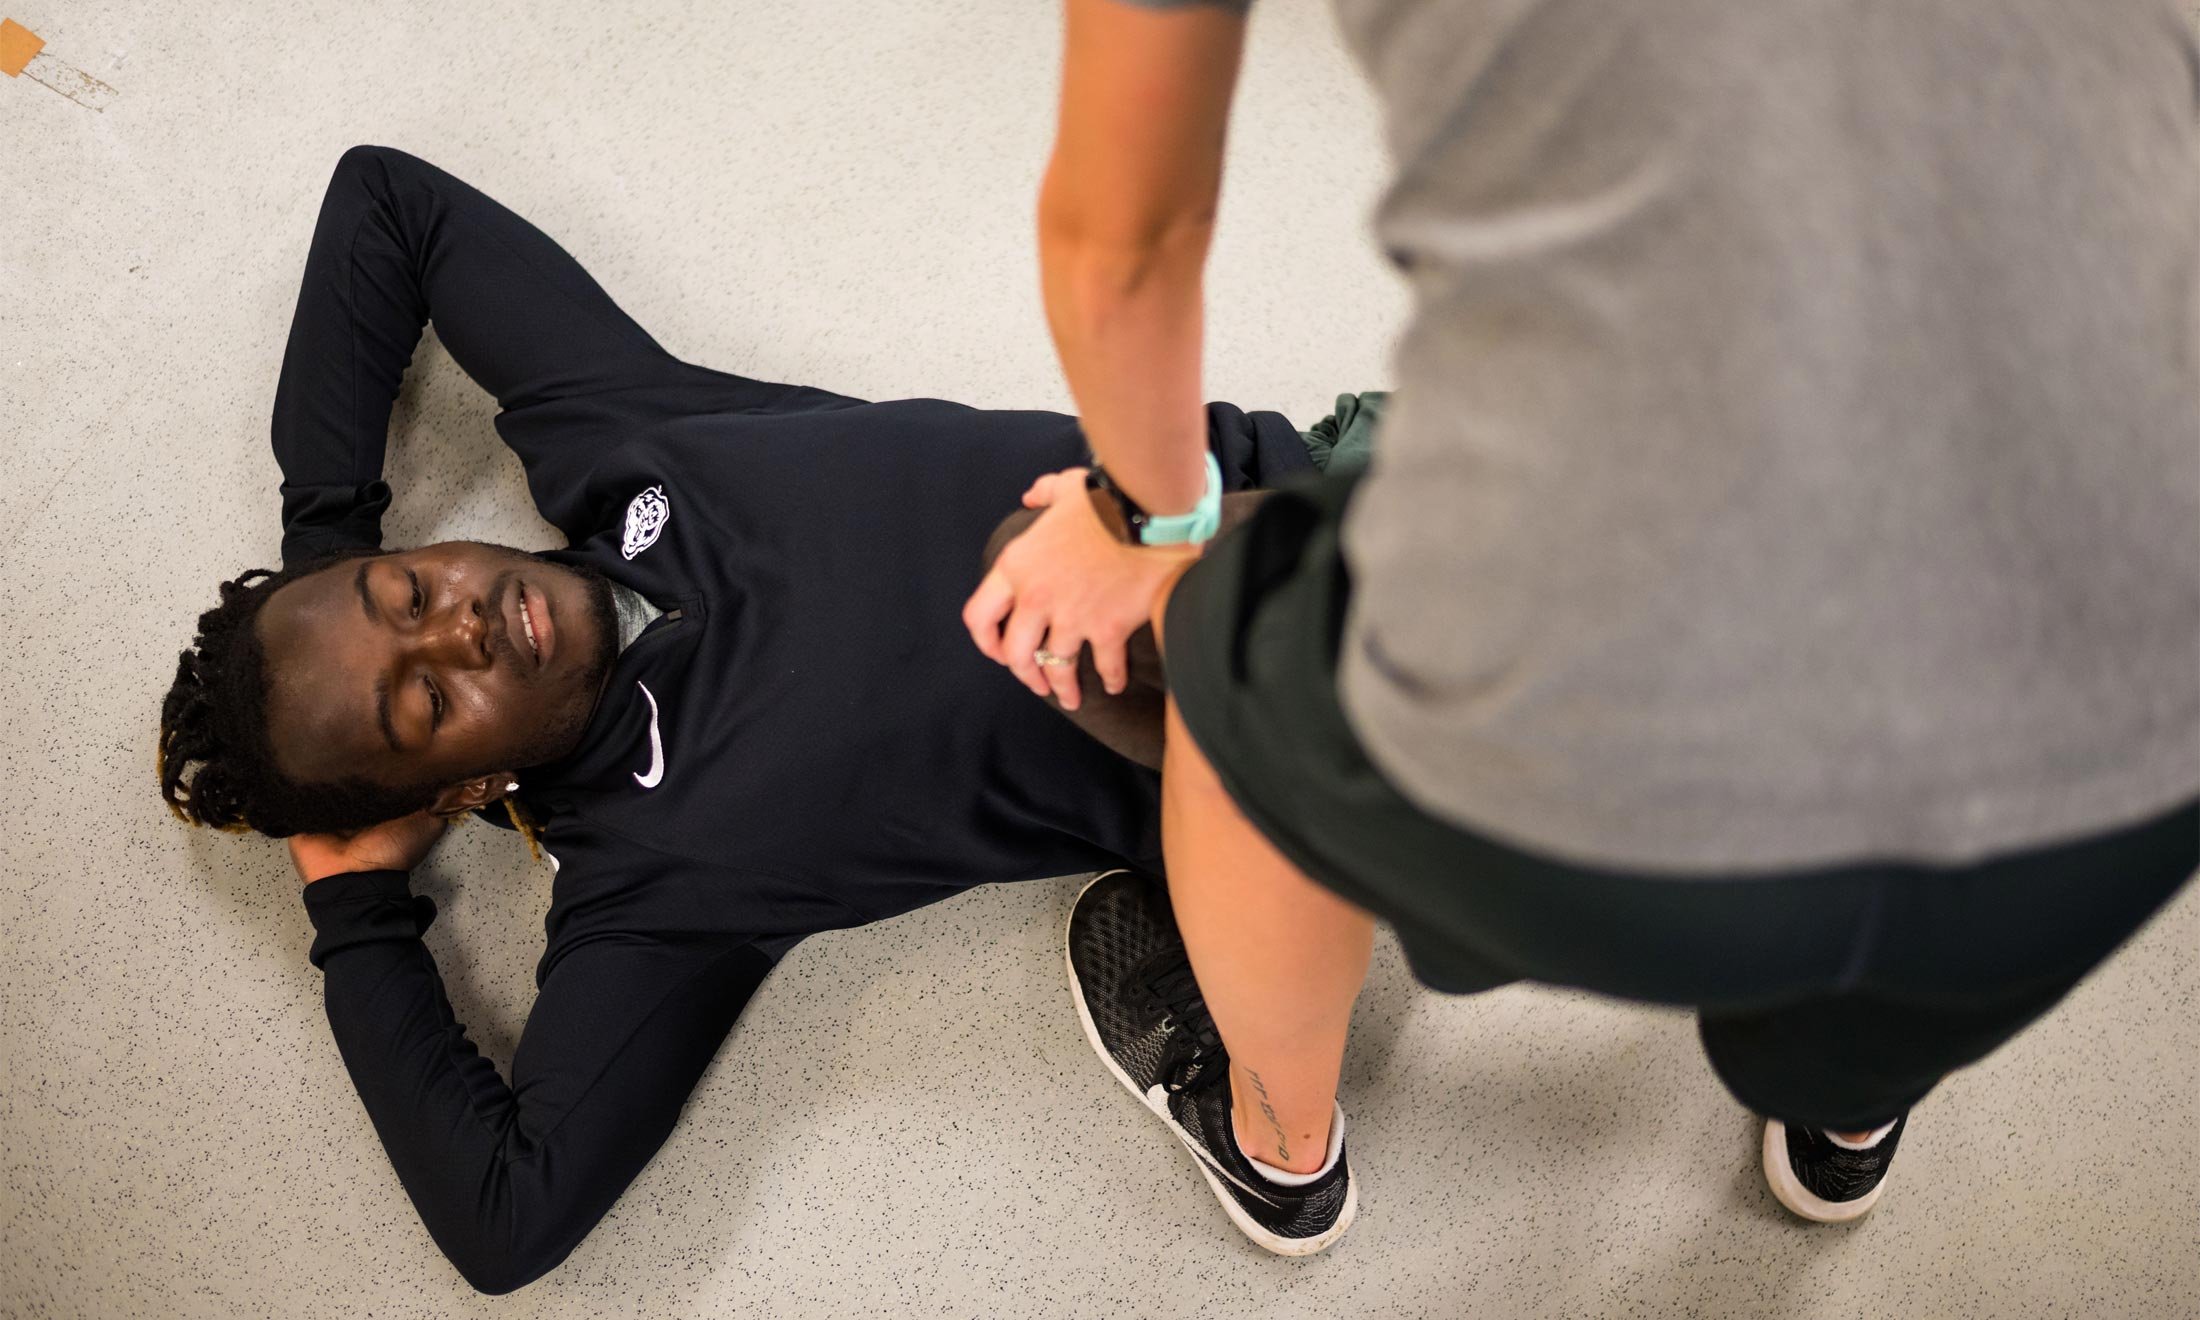 Oakland University soccer player Wilfred Williams lays on a white floor while a trainer helps stretch his legs